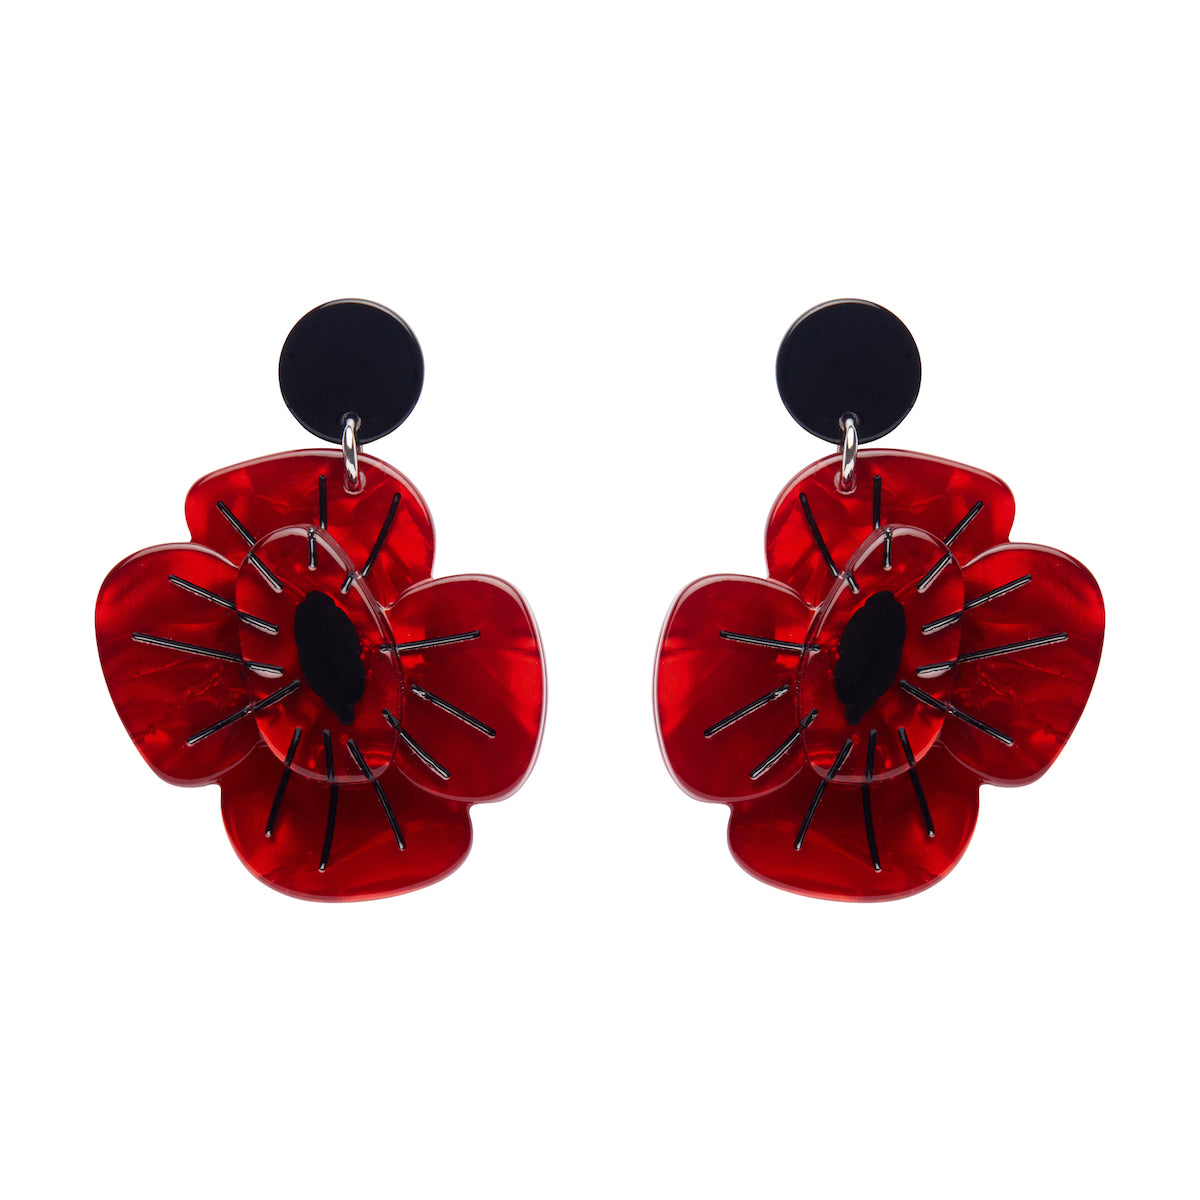 Remembrance Poppy ripple red bloom with black center drop earrings